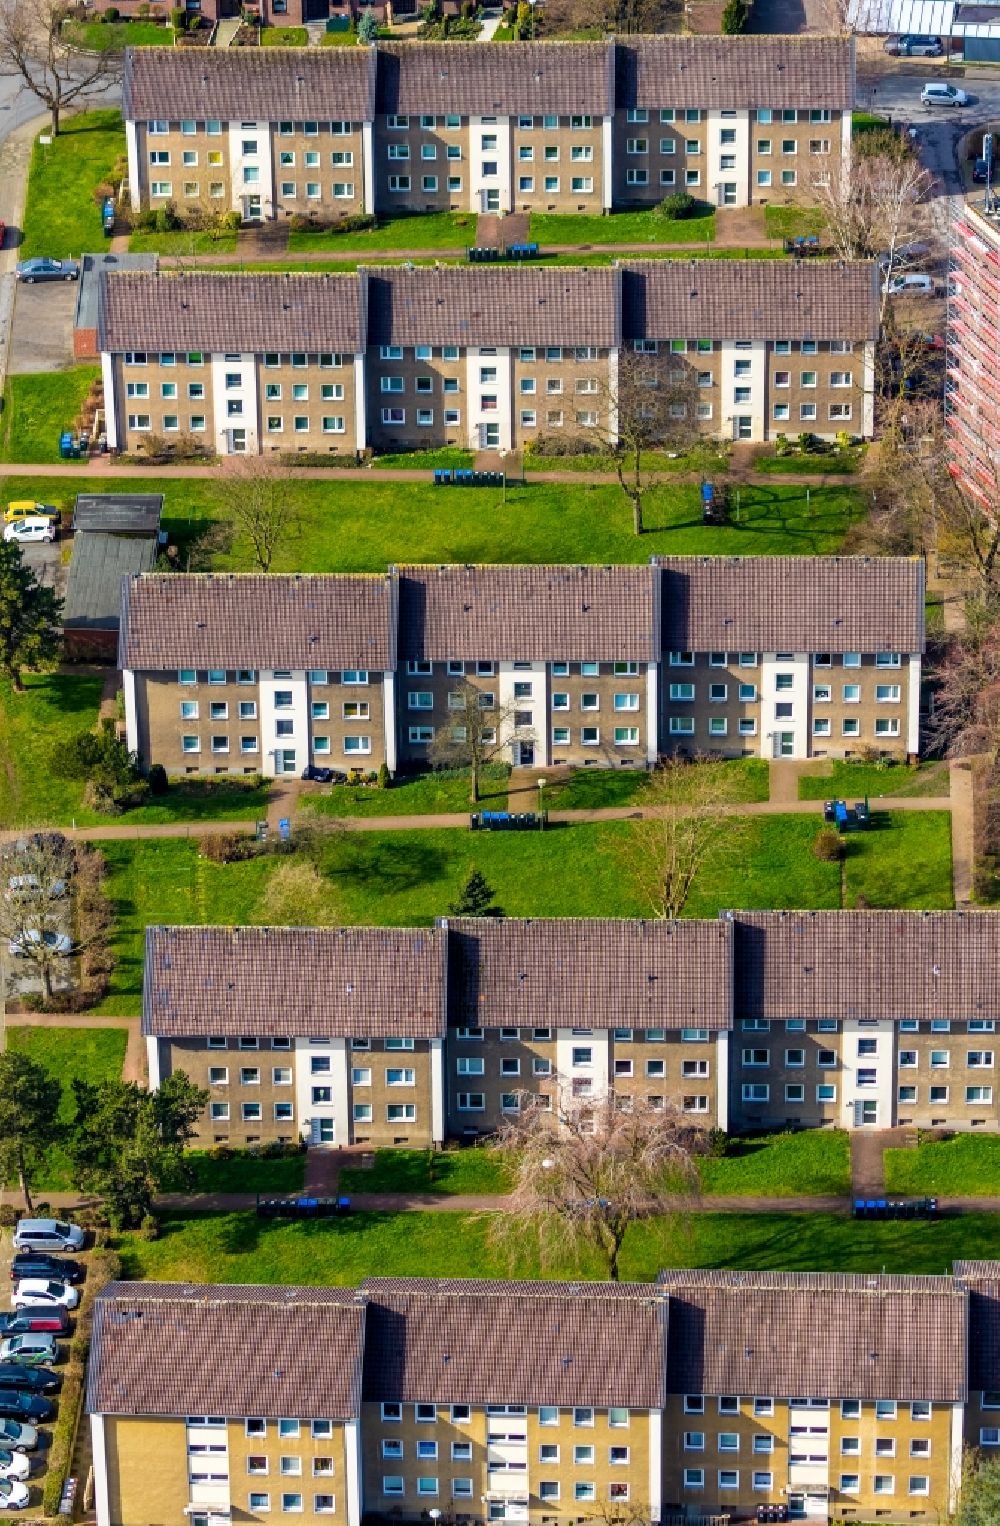 Aerial photograph Bockum-Hövel - Residential area of a row house settlement between Uphofstrasse and Adlerstrasse in Bockum-Hoevel in the state North Rhine-Westphalia, Germany